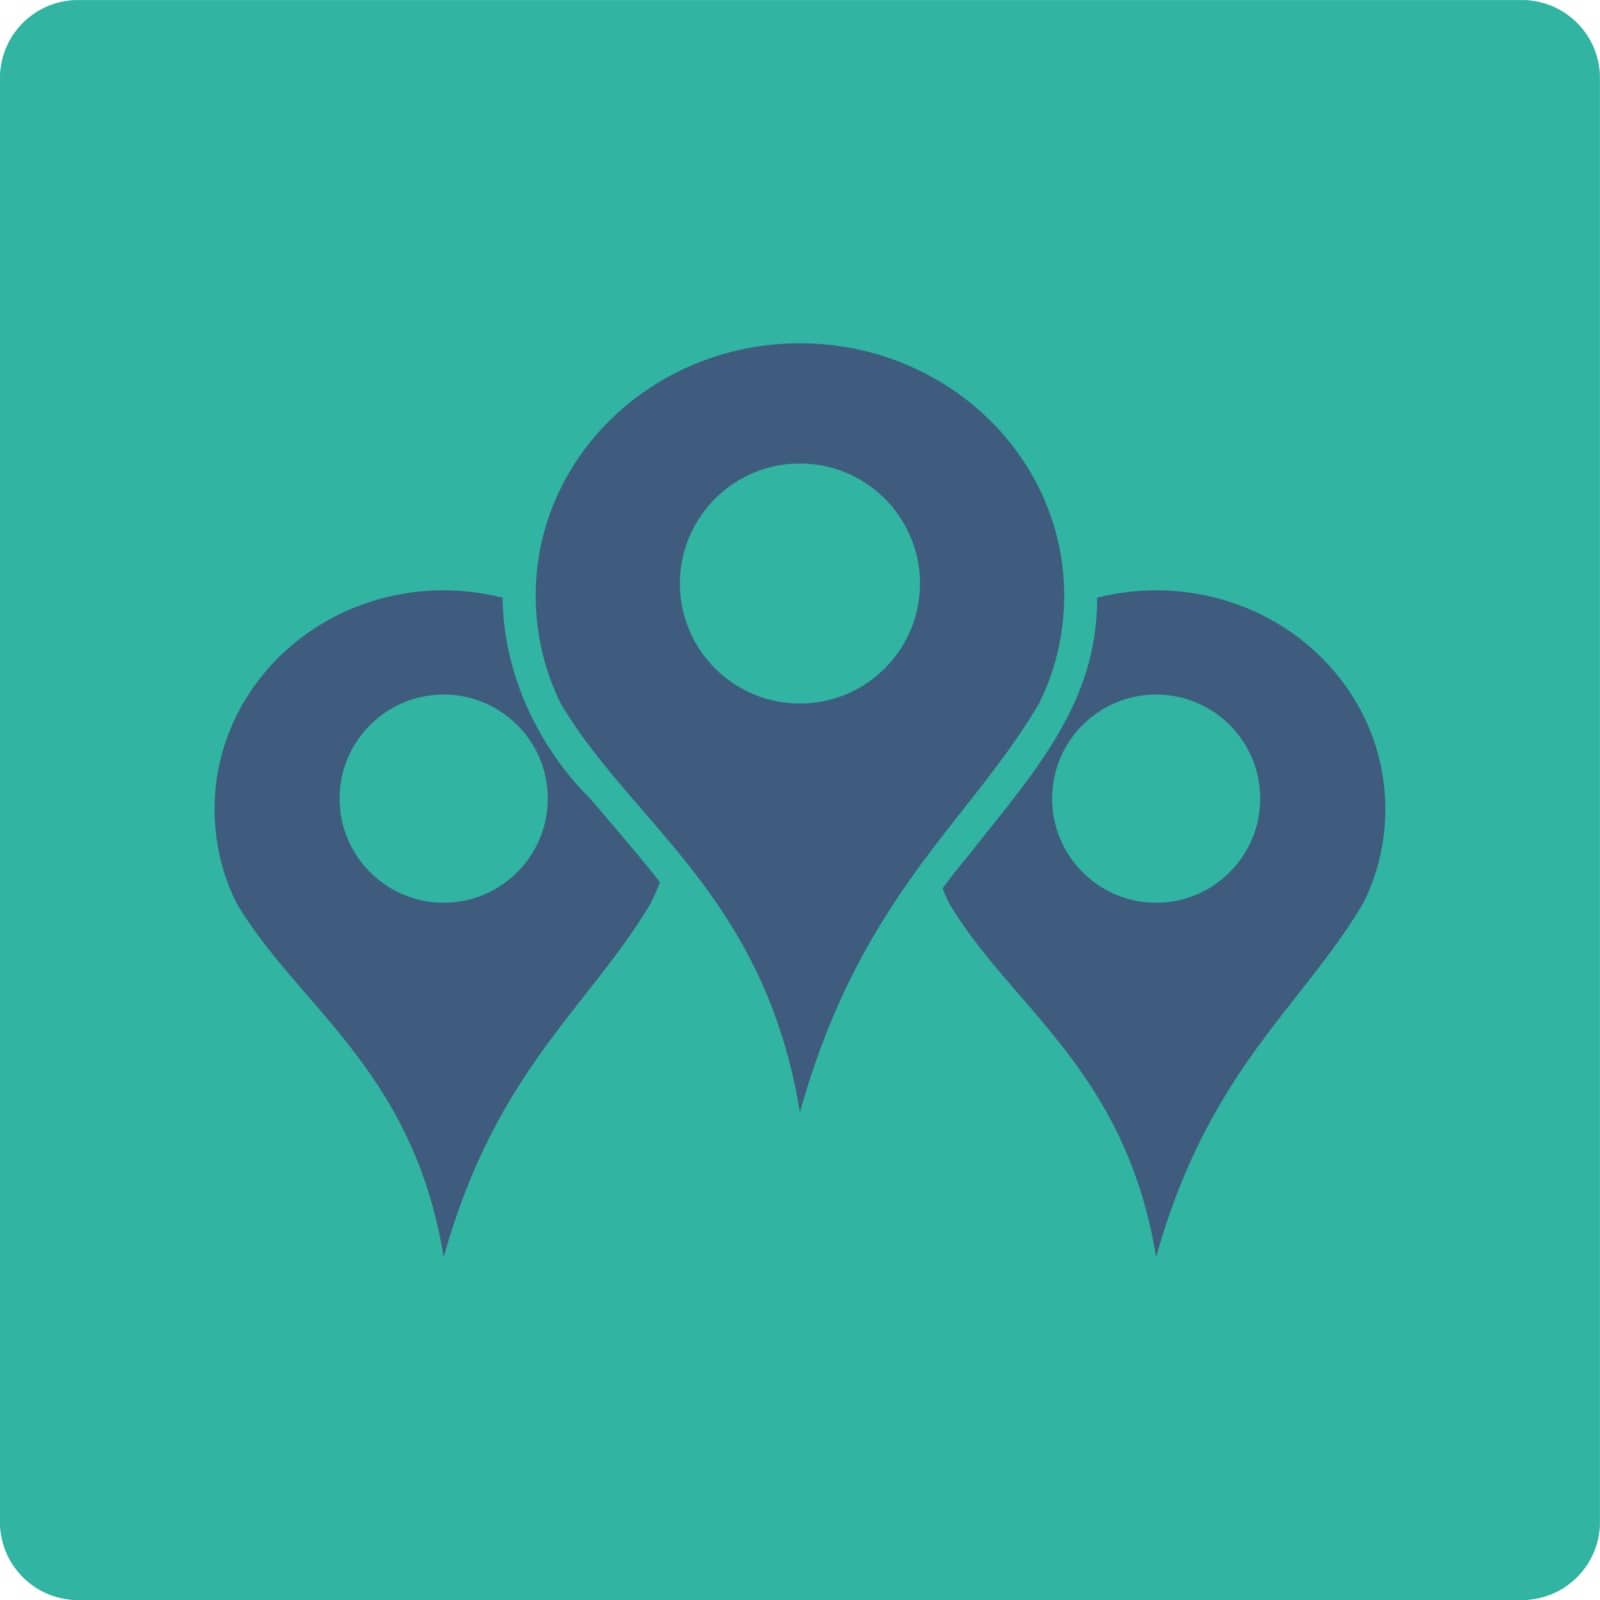 Locations vector icon. This flat rounded square button uses cobalt and cyan colors and isolated on a white background.